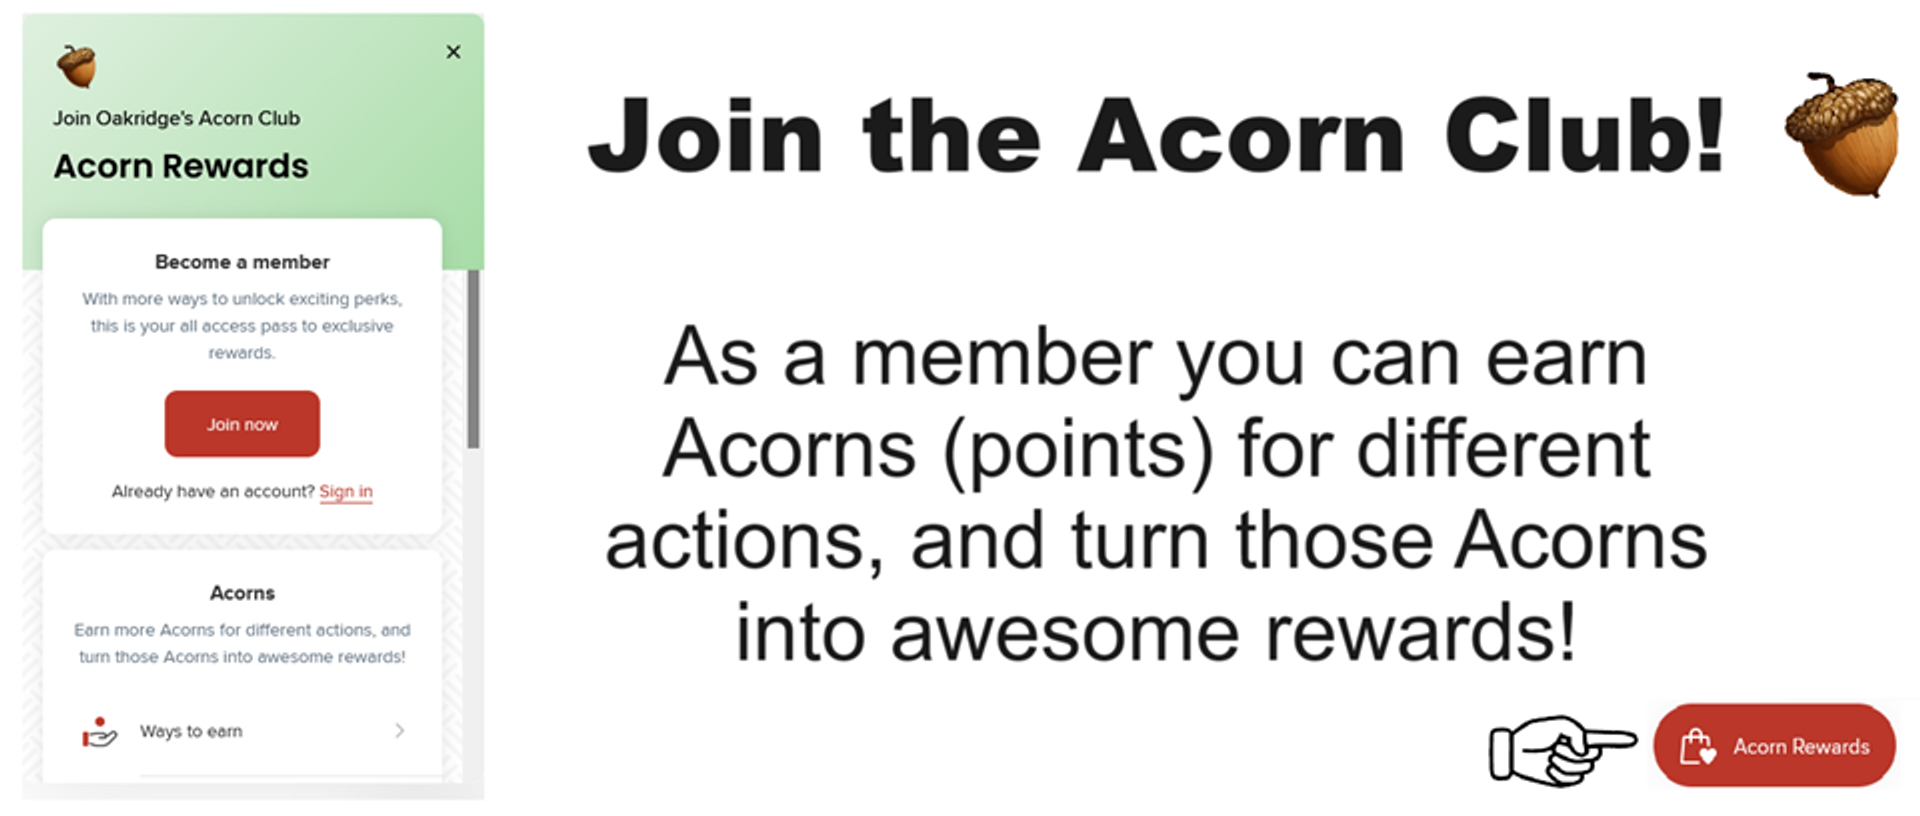 Join the Acorn Club. Earn Acorn pointsfor diferent actions and turn those Acorns into awesome rewards!